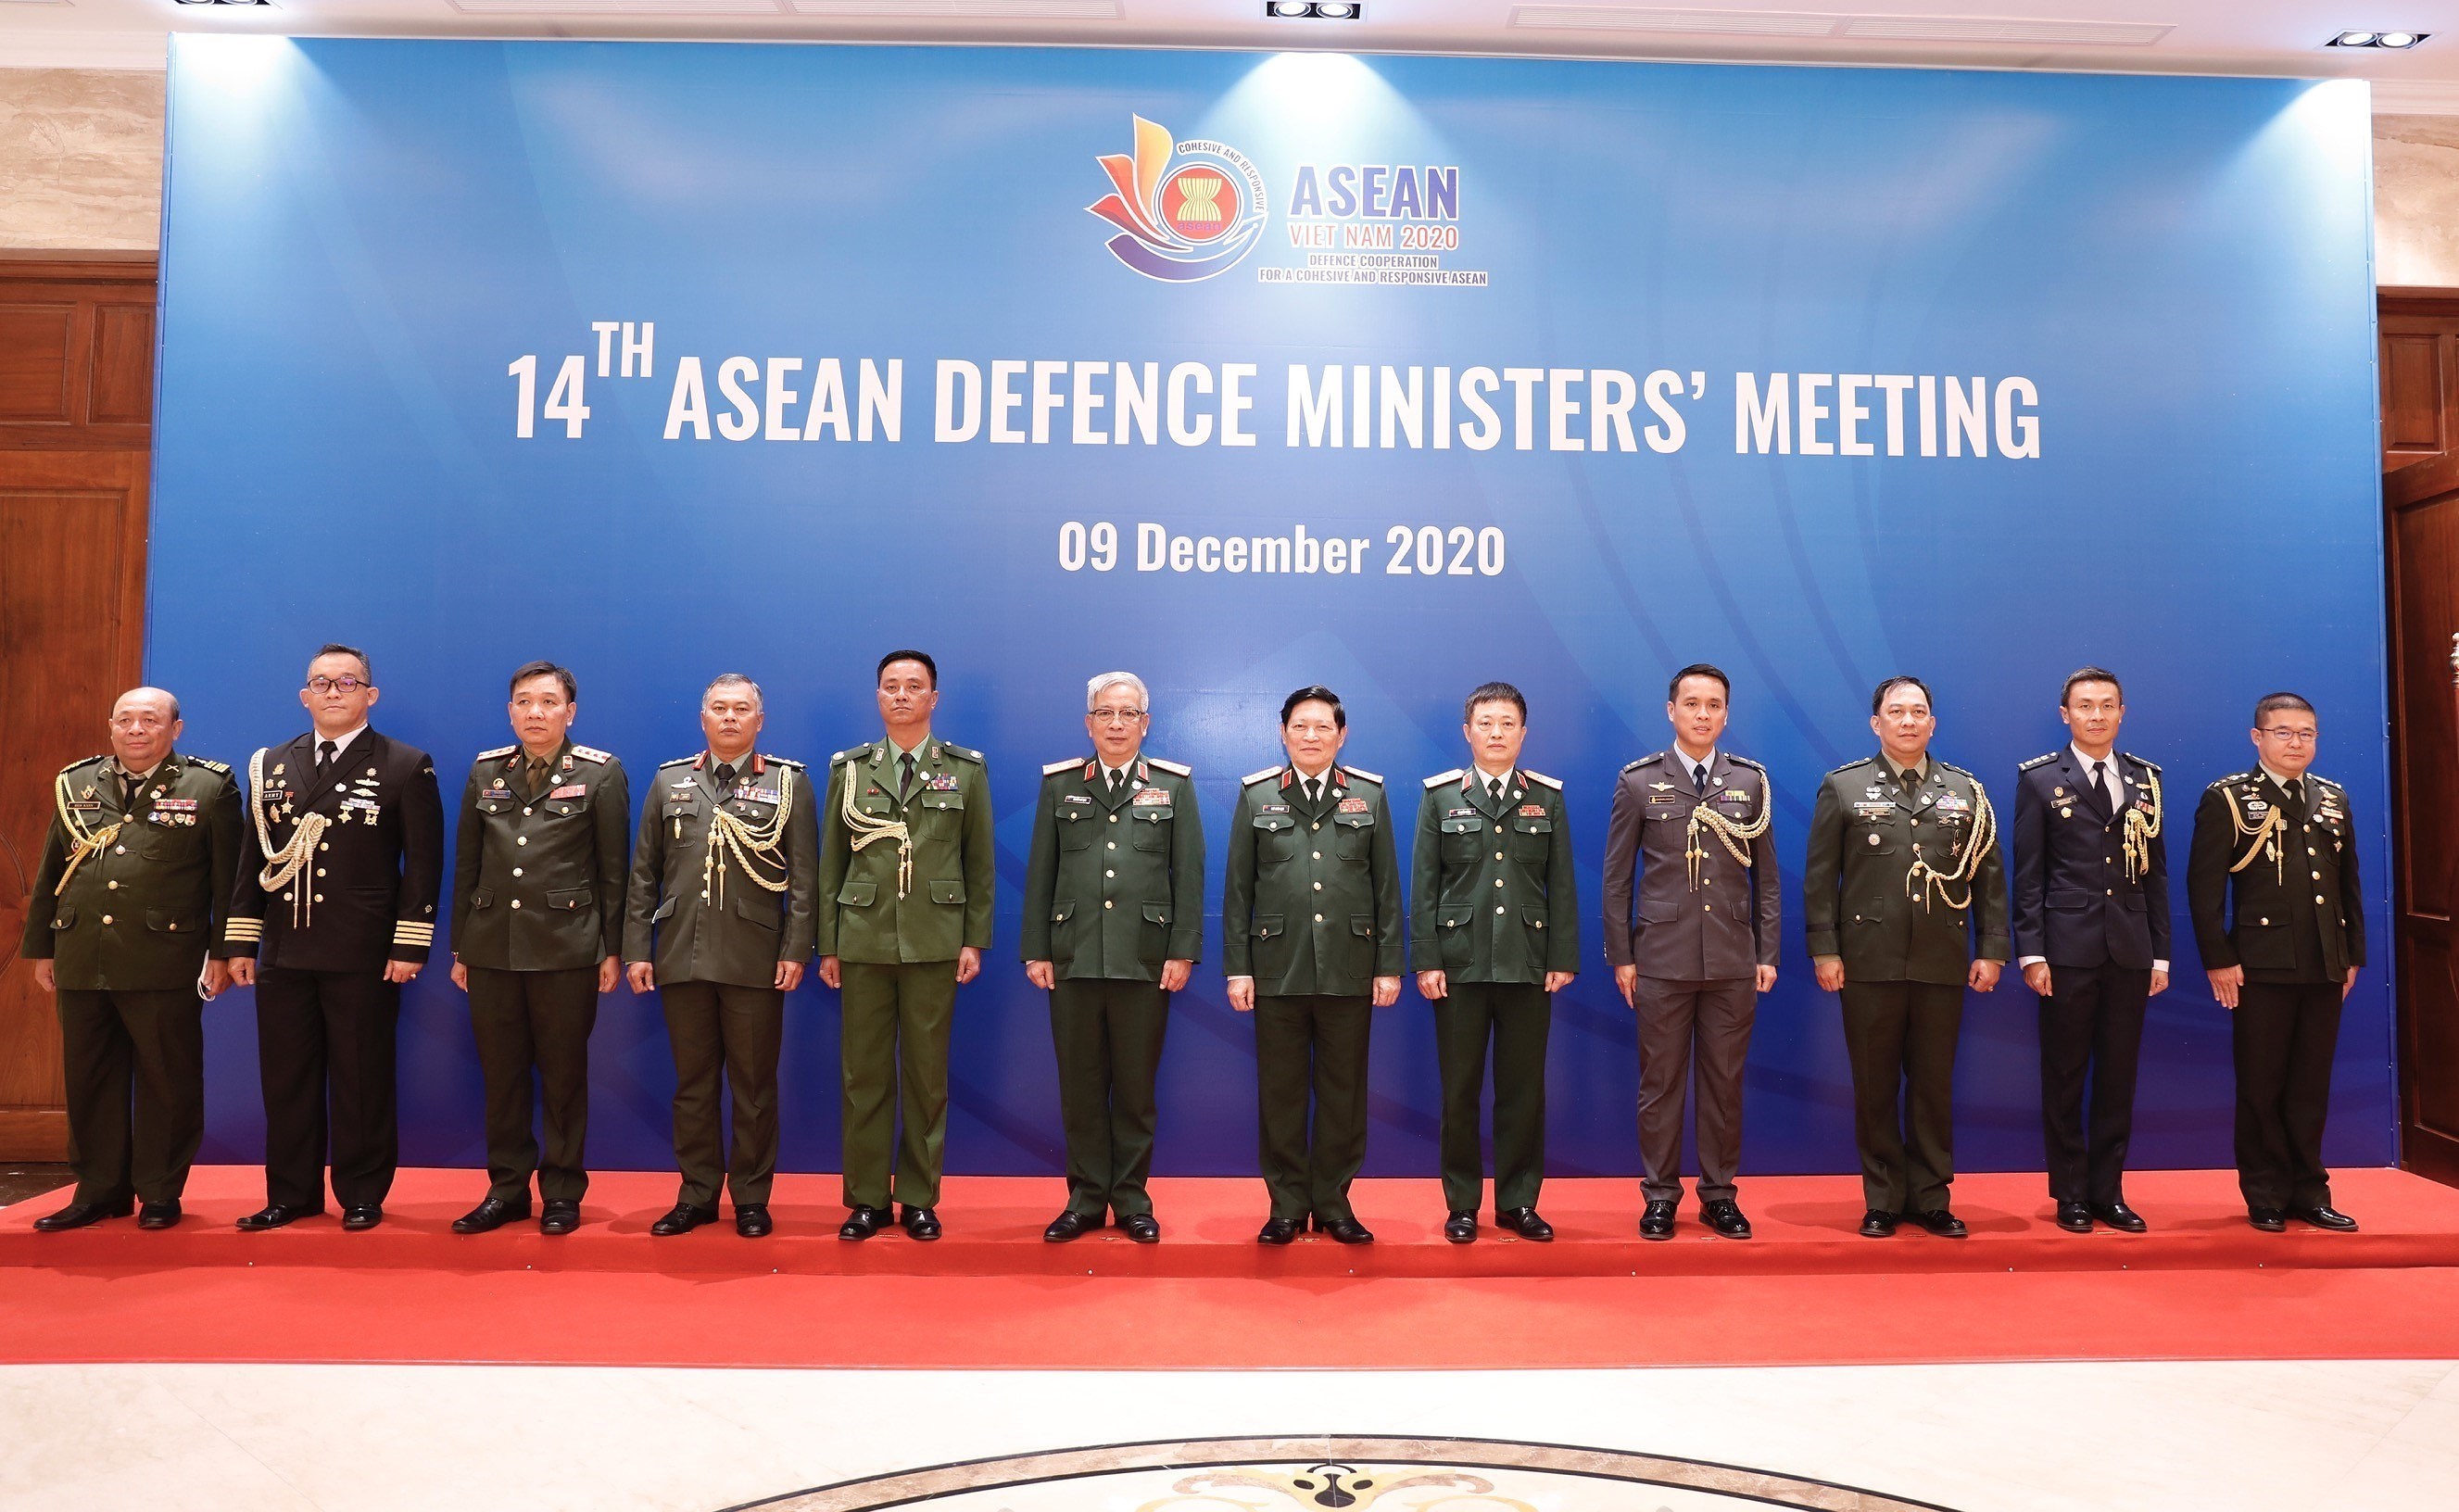 ASEAN 2020: 14th ASEAN Defence Ministers' Meeting hinh anh 1